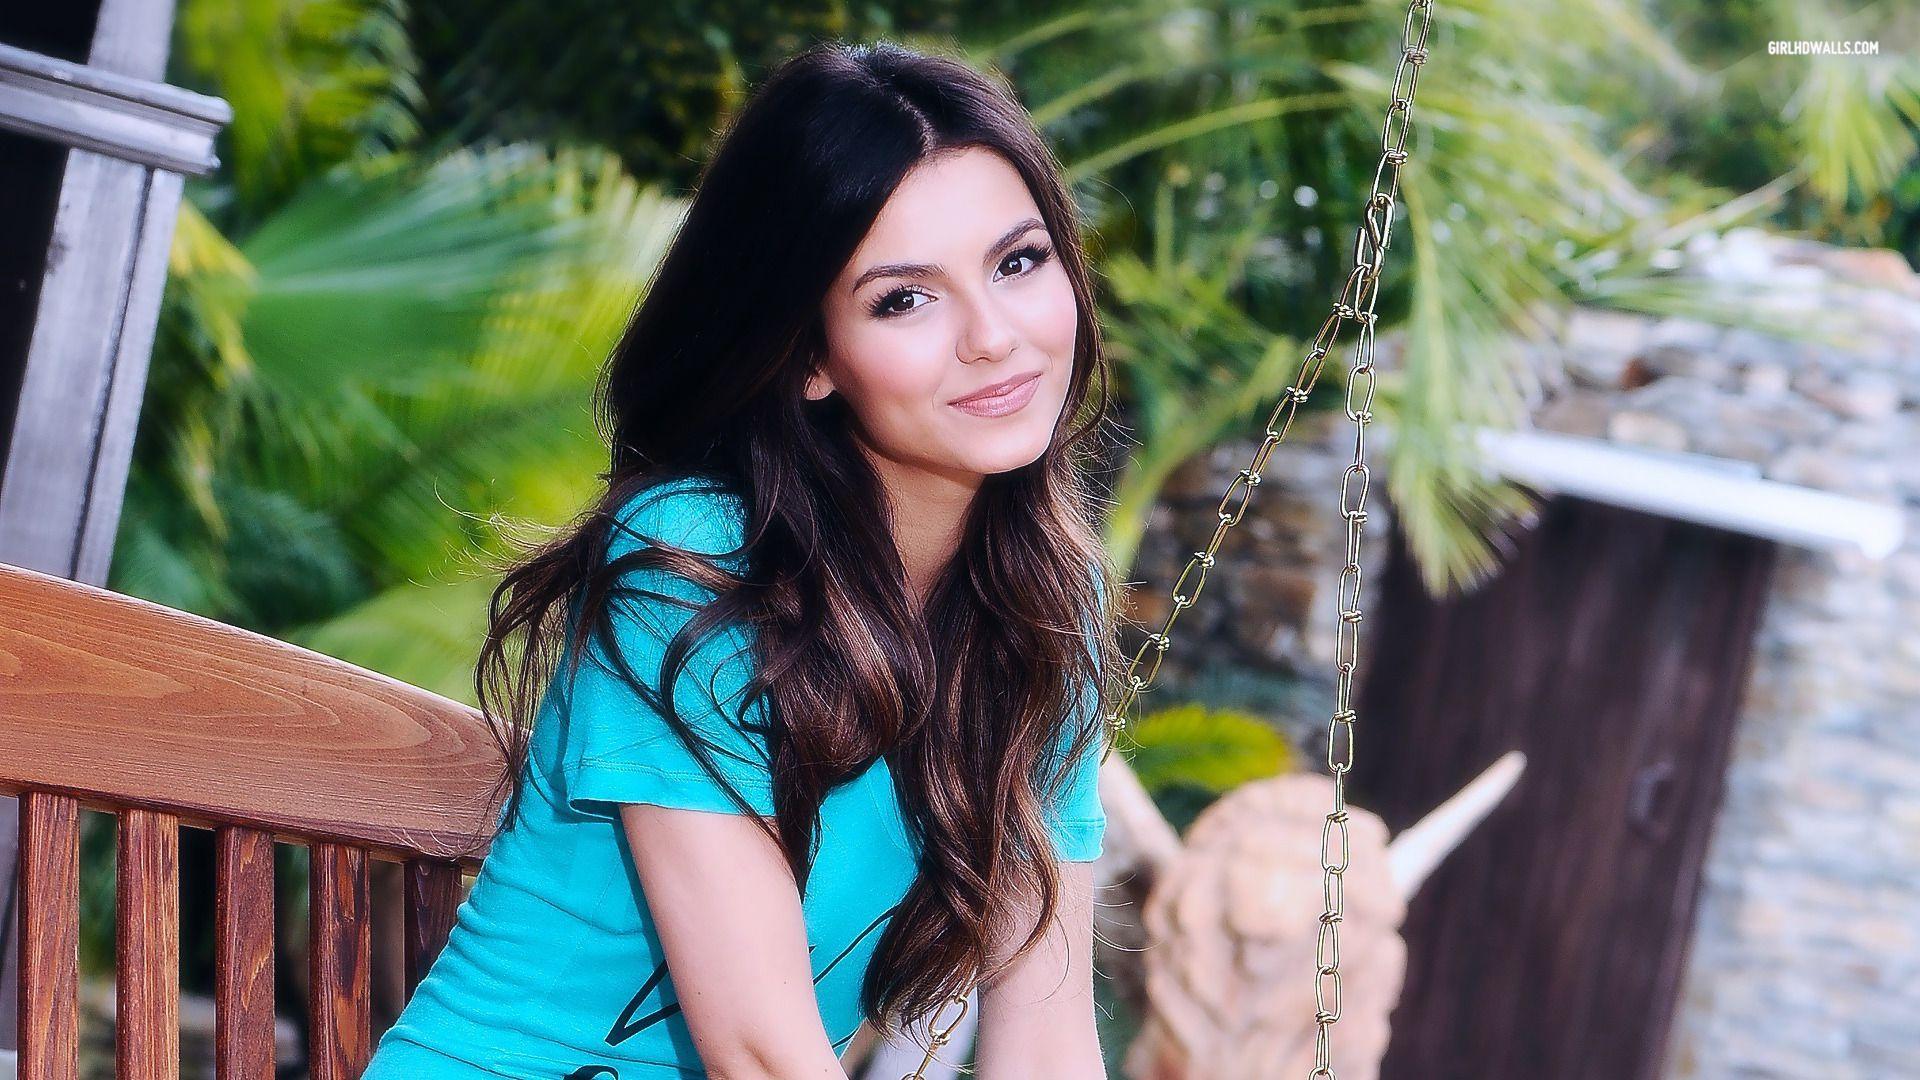 Victoria Justice Wallpaper High Quality